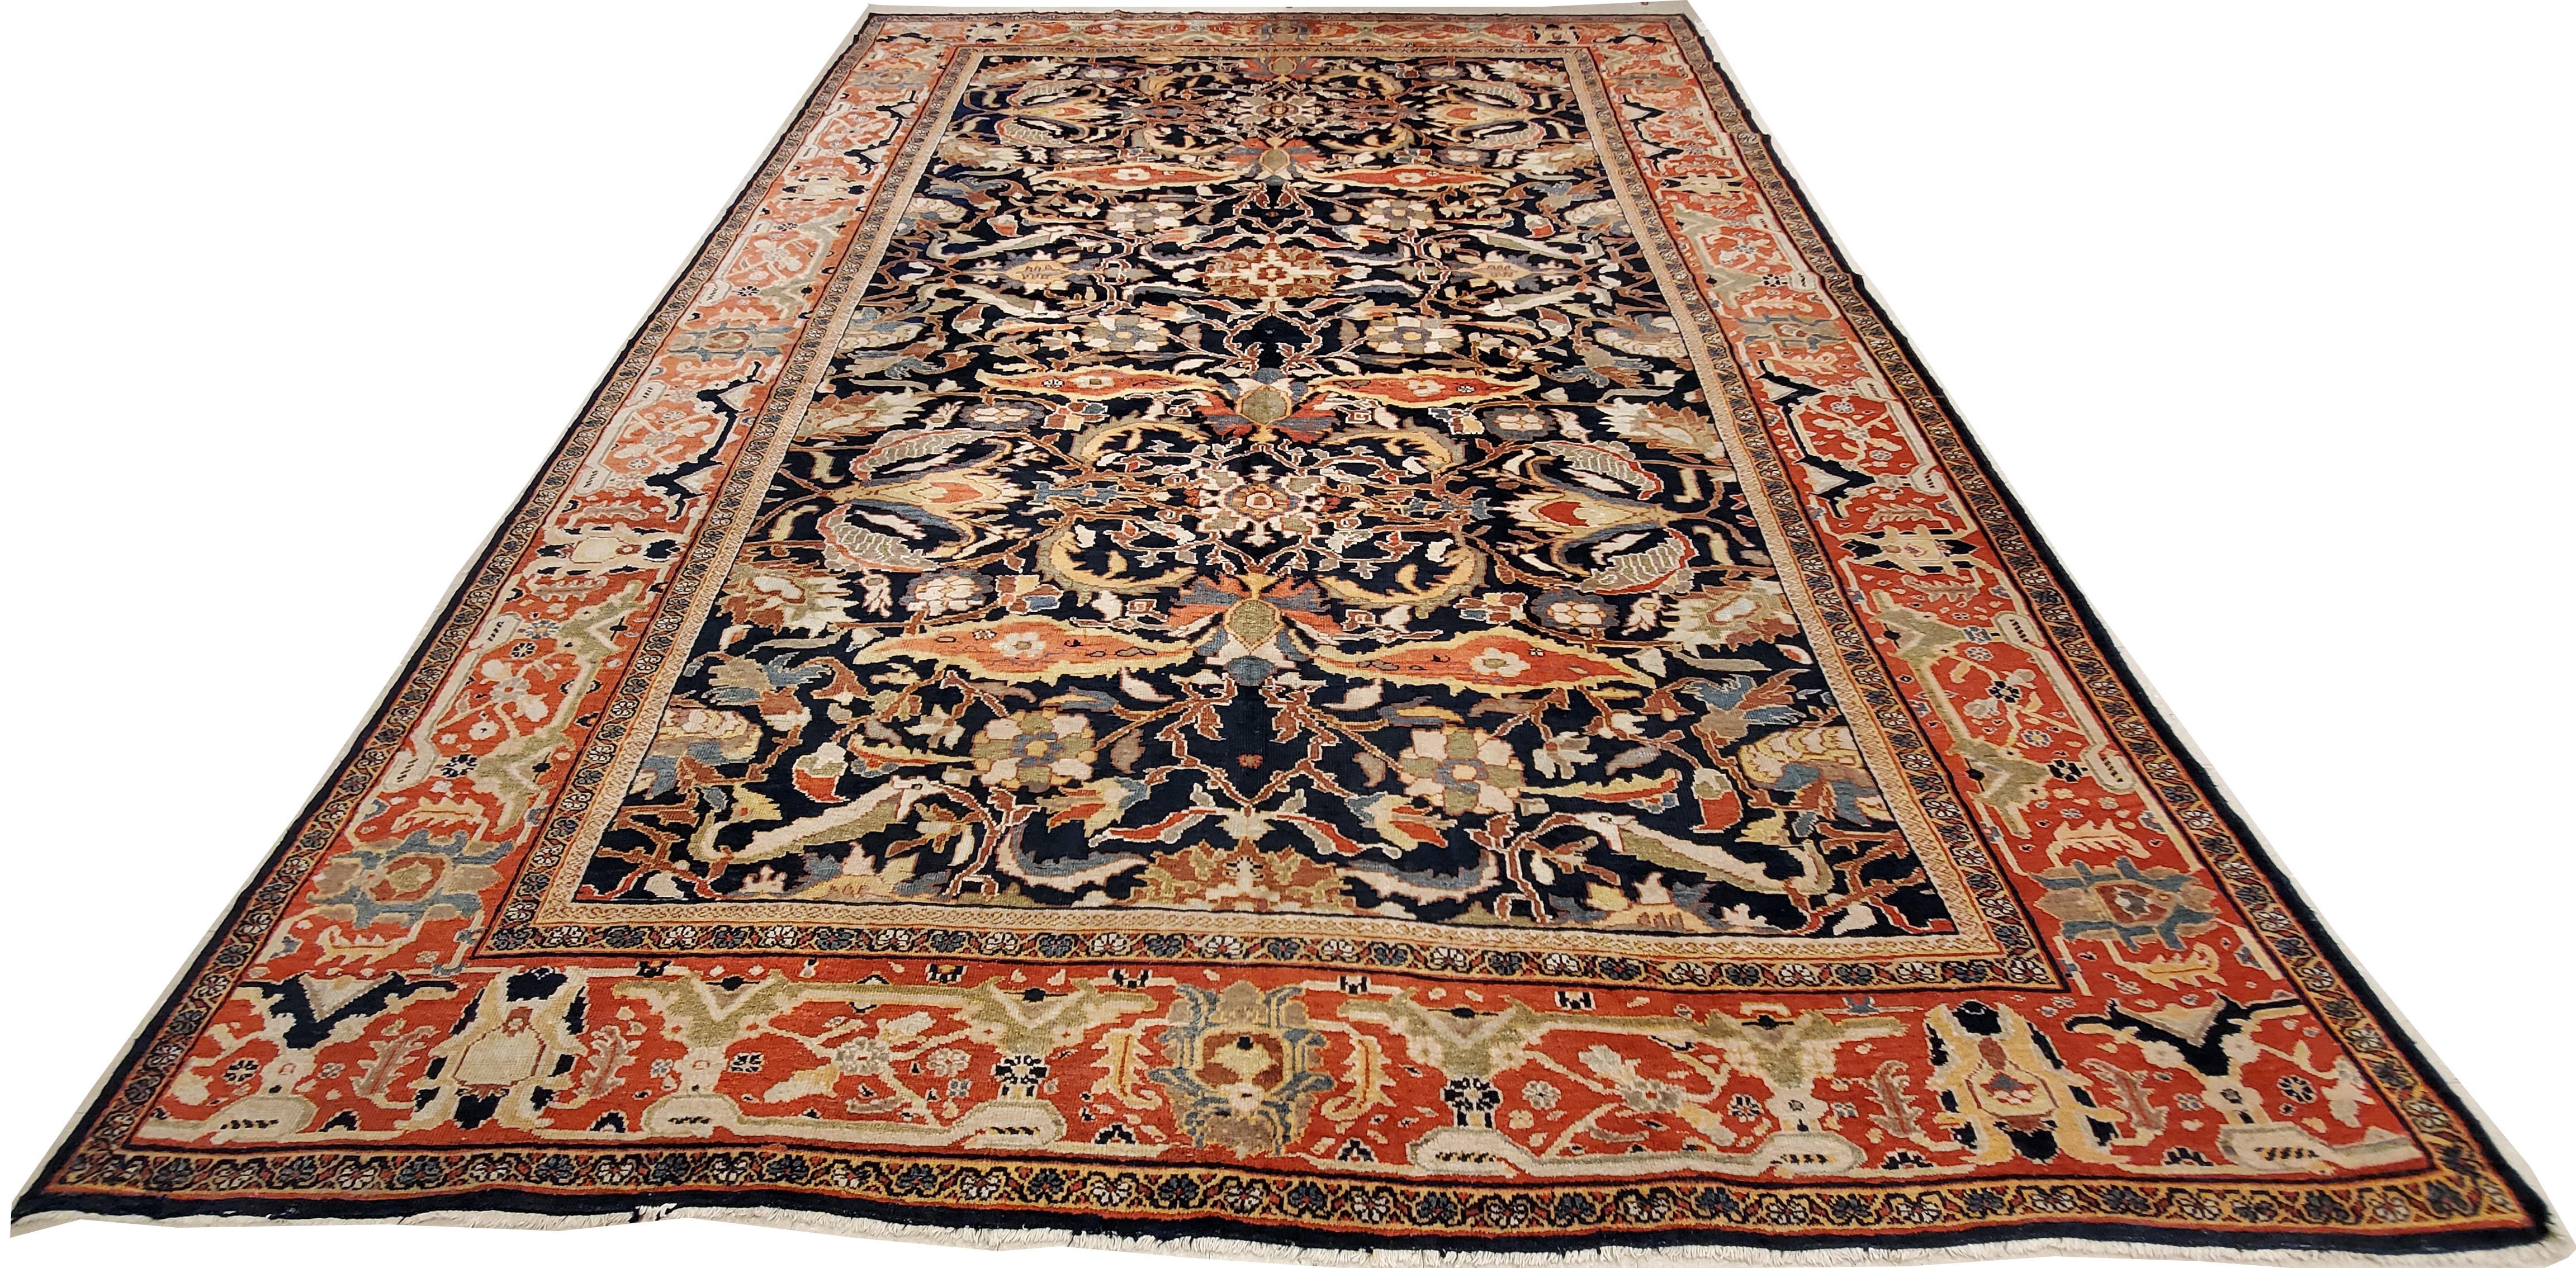 Wool Antique Persian Sultanabad Carpet, Handmade Oriental Rug, Navy Blue, Rust, Gold For Sale